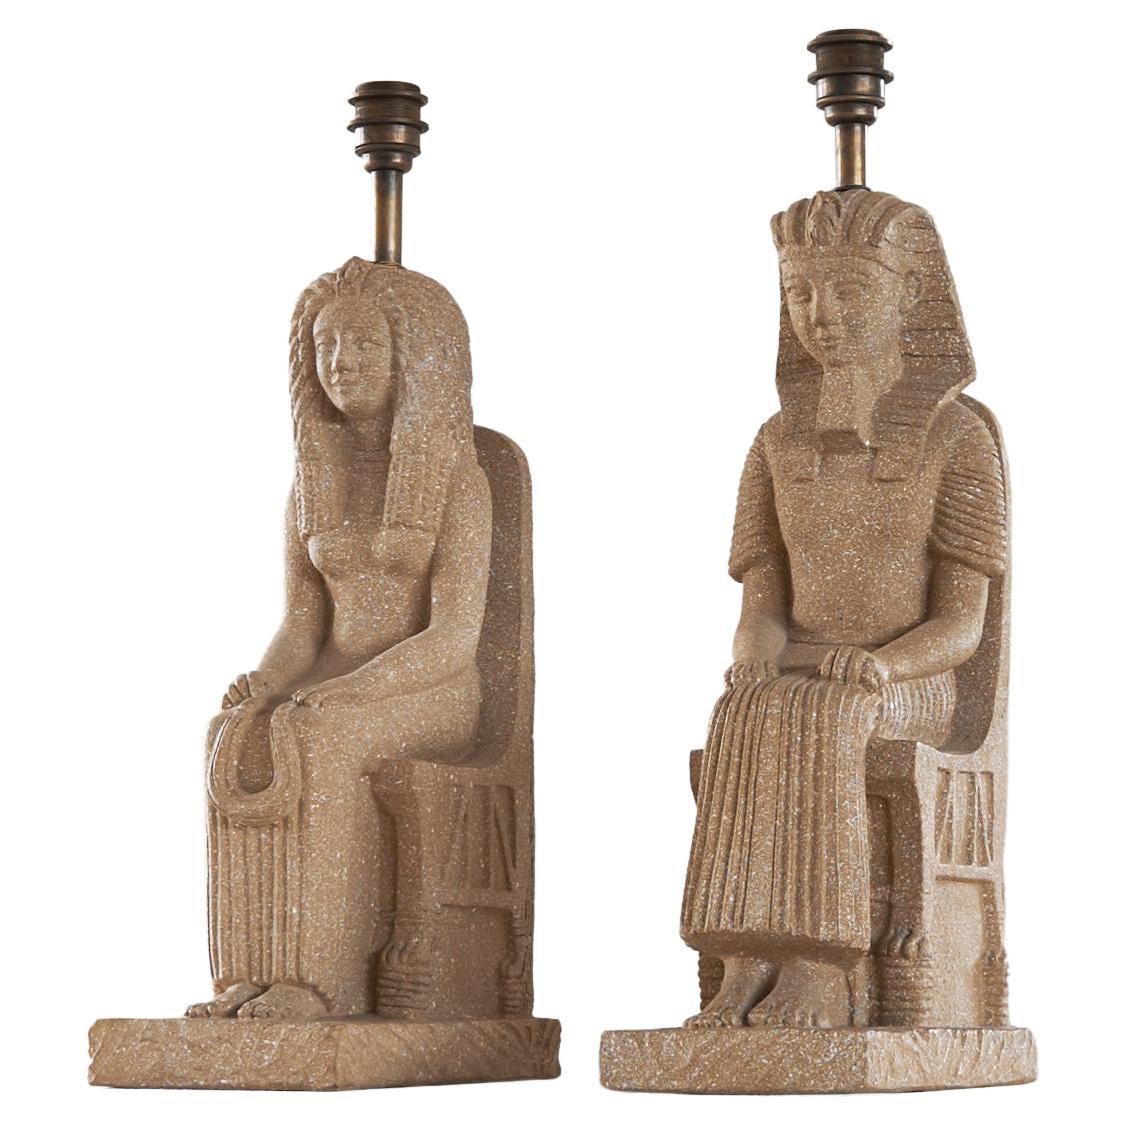 Zaccagnini Florence Pair of Monumental Pharaoh Ceramic Table Lamps Italy 1970s For Sale